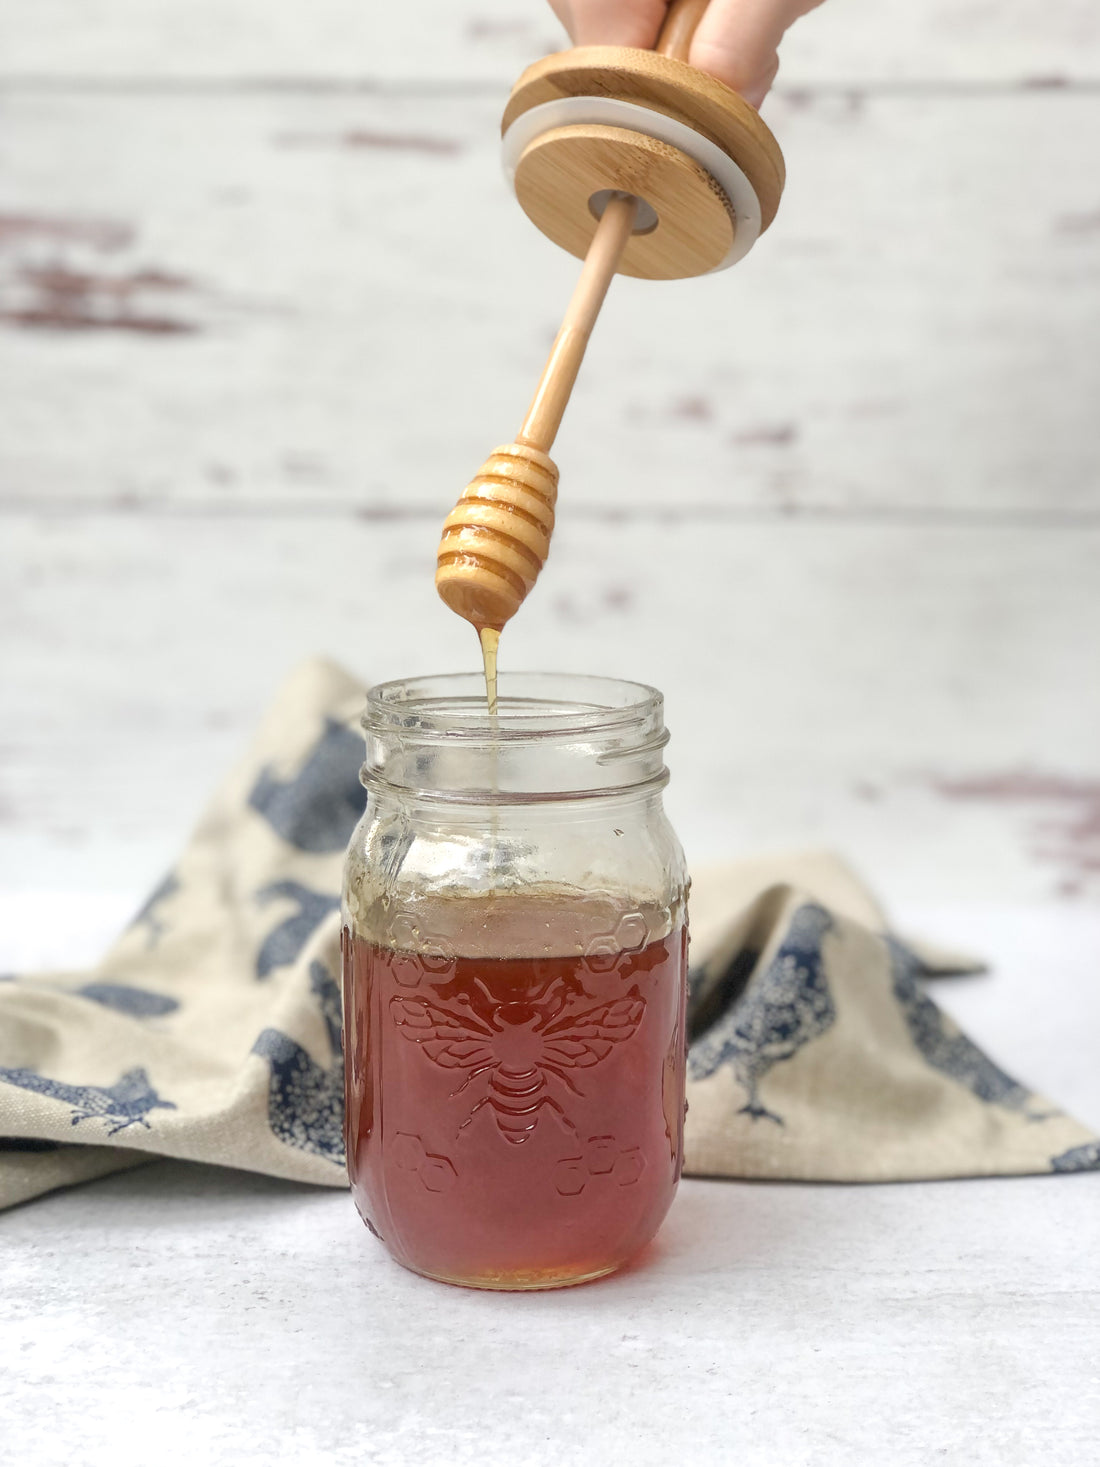 wooden honey dipper lid streaming honey into a regular mouth mason jar with chicken towel in the background